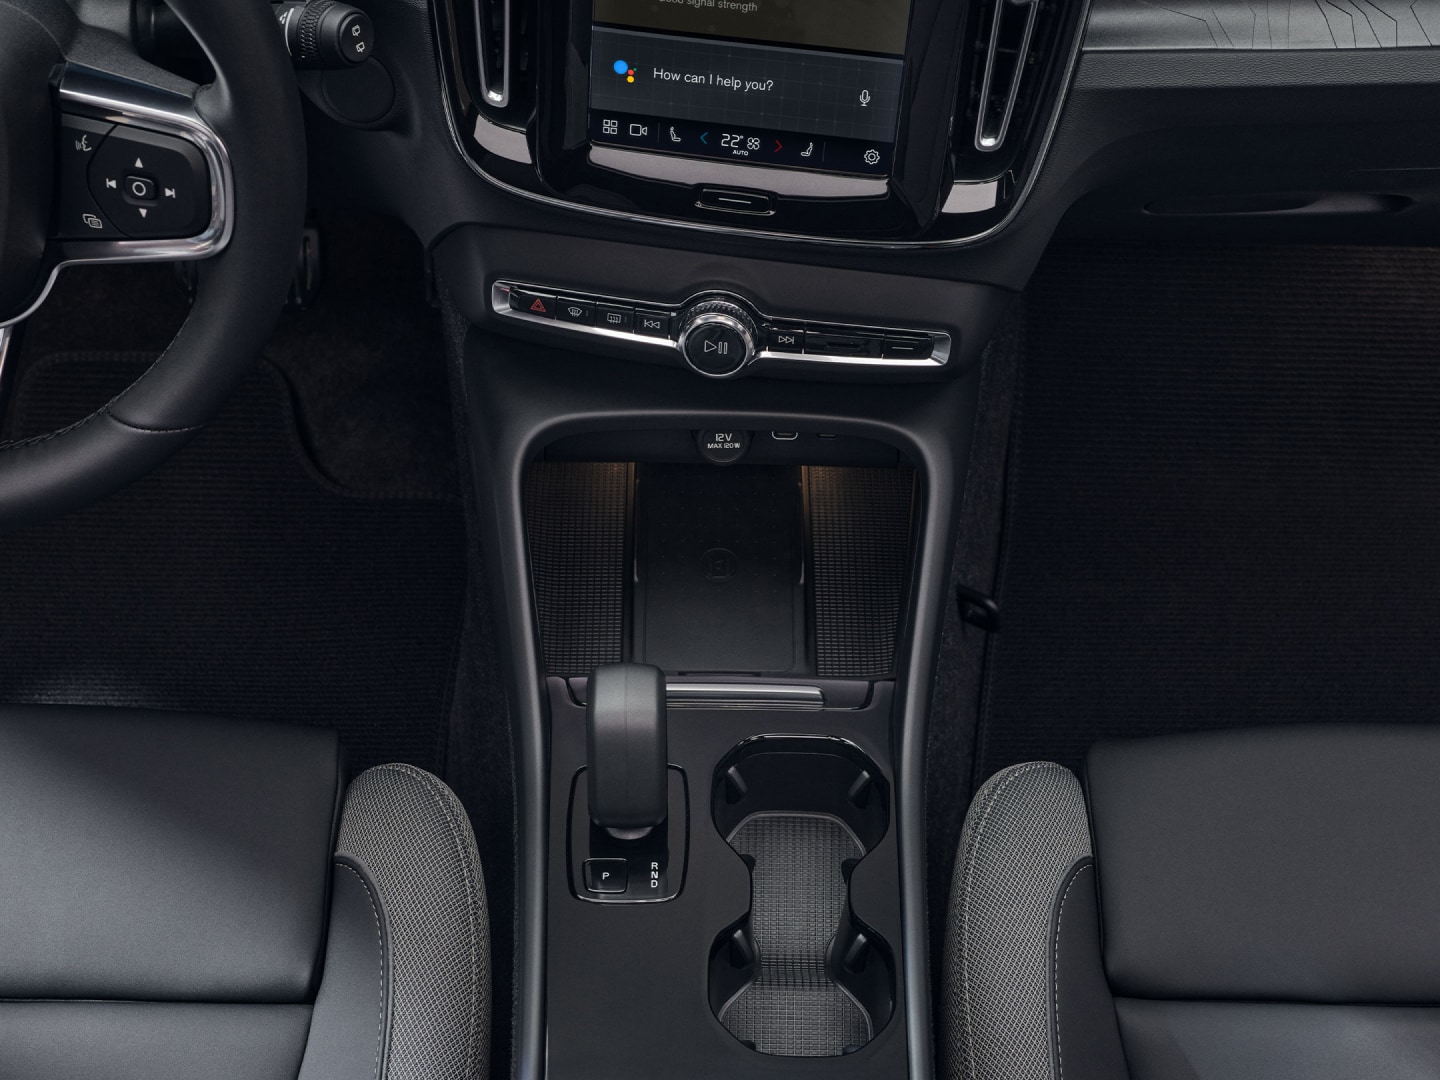 The cupholder, gear shift and wireless charger positioned between the front seats of the fully electric Volvo EX40.